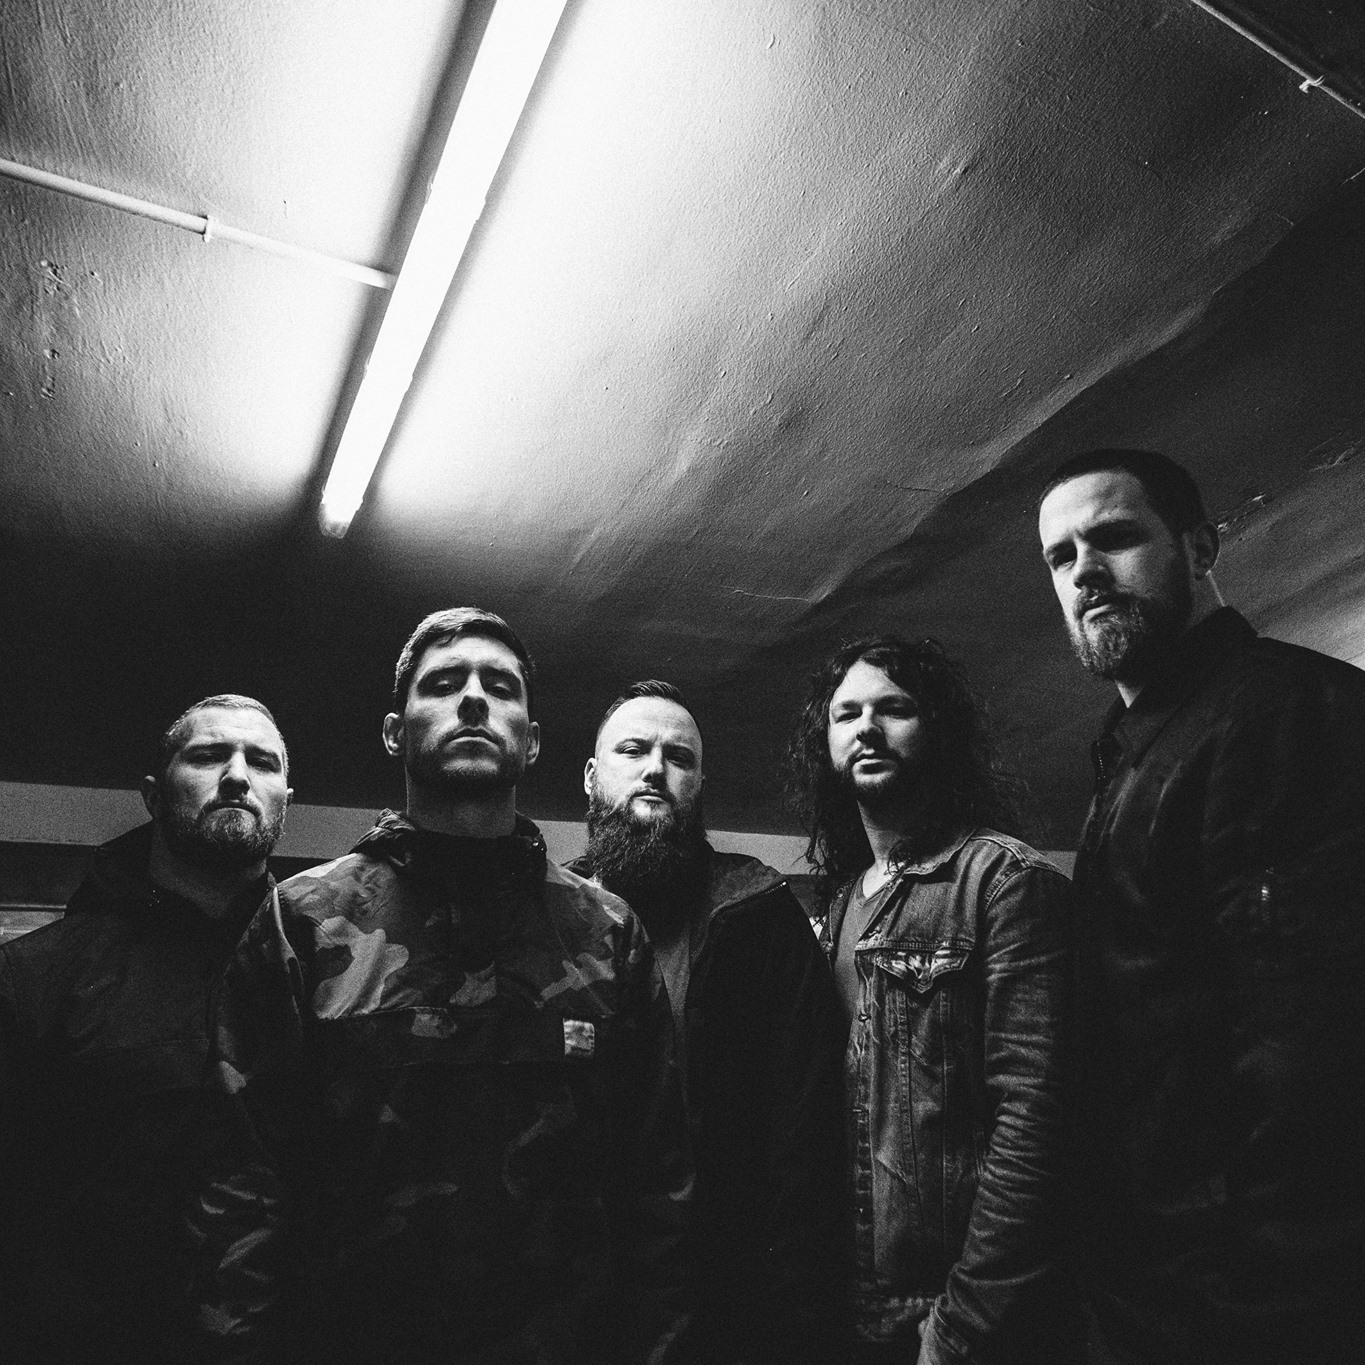 Whitechapel to release ‘The Valley’ in March, streaming new song “Brimstone”